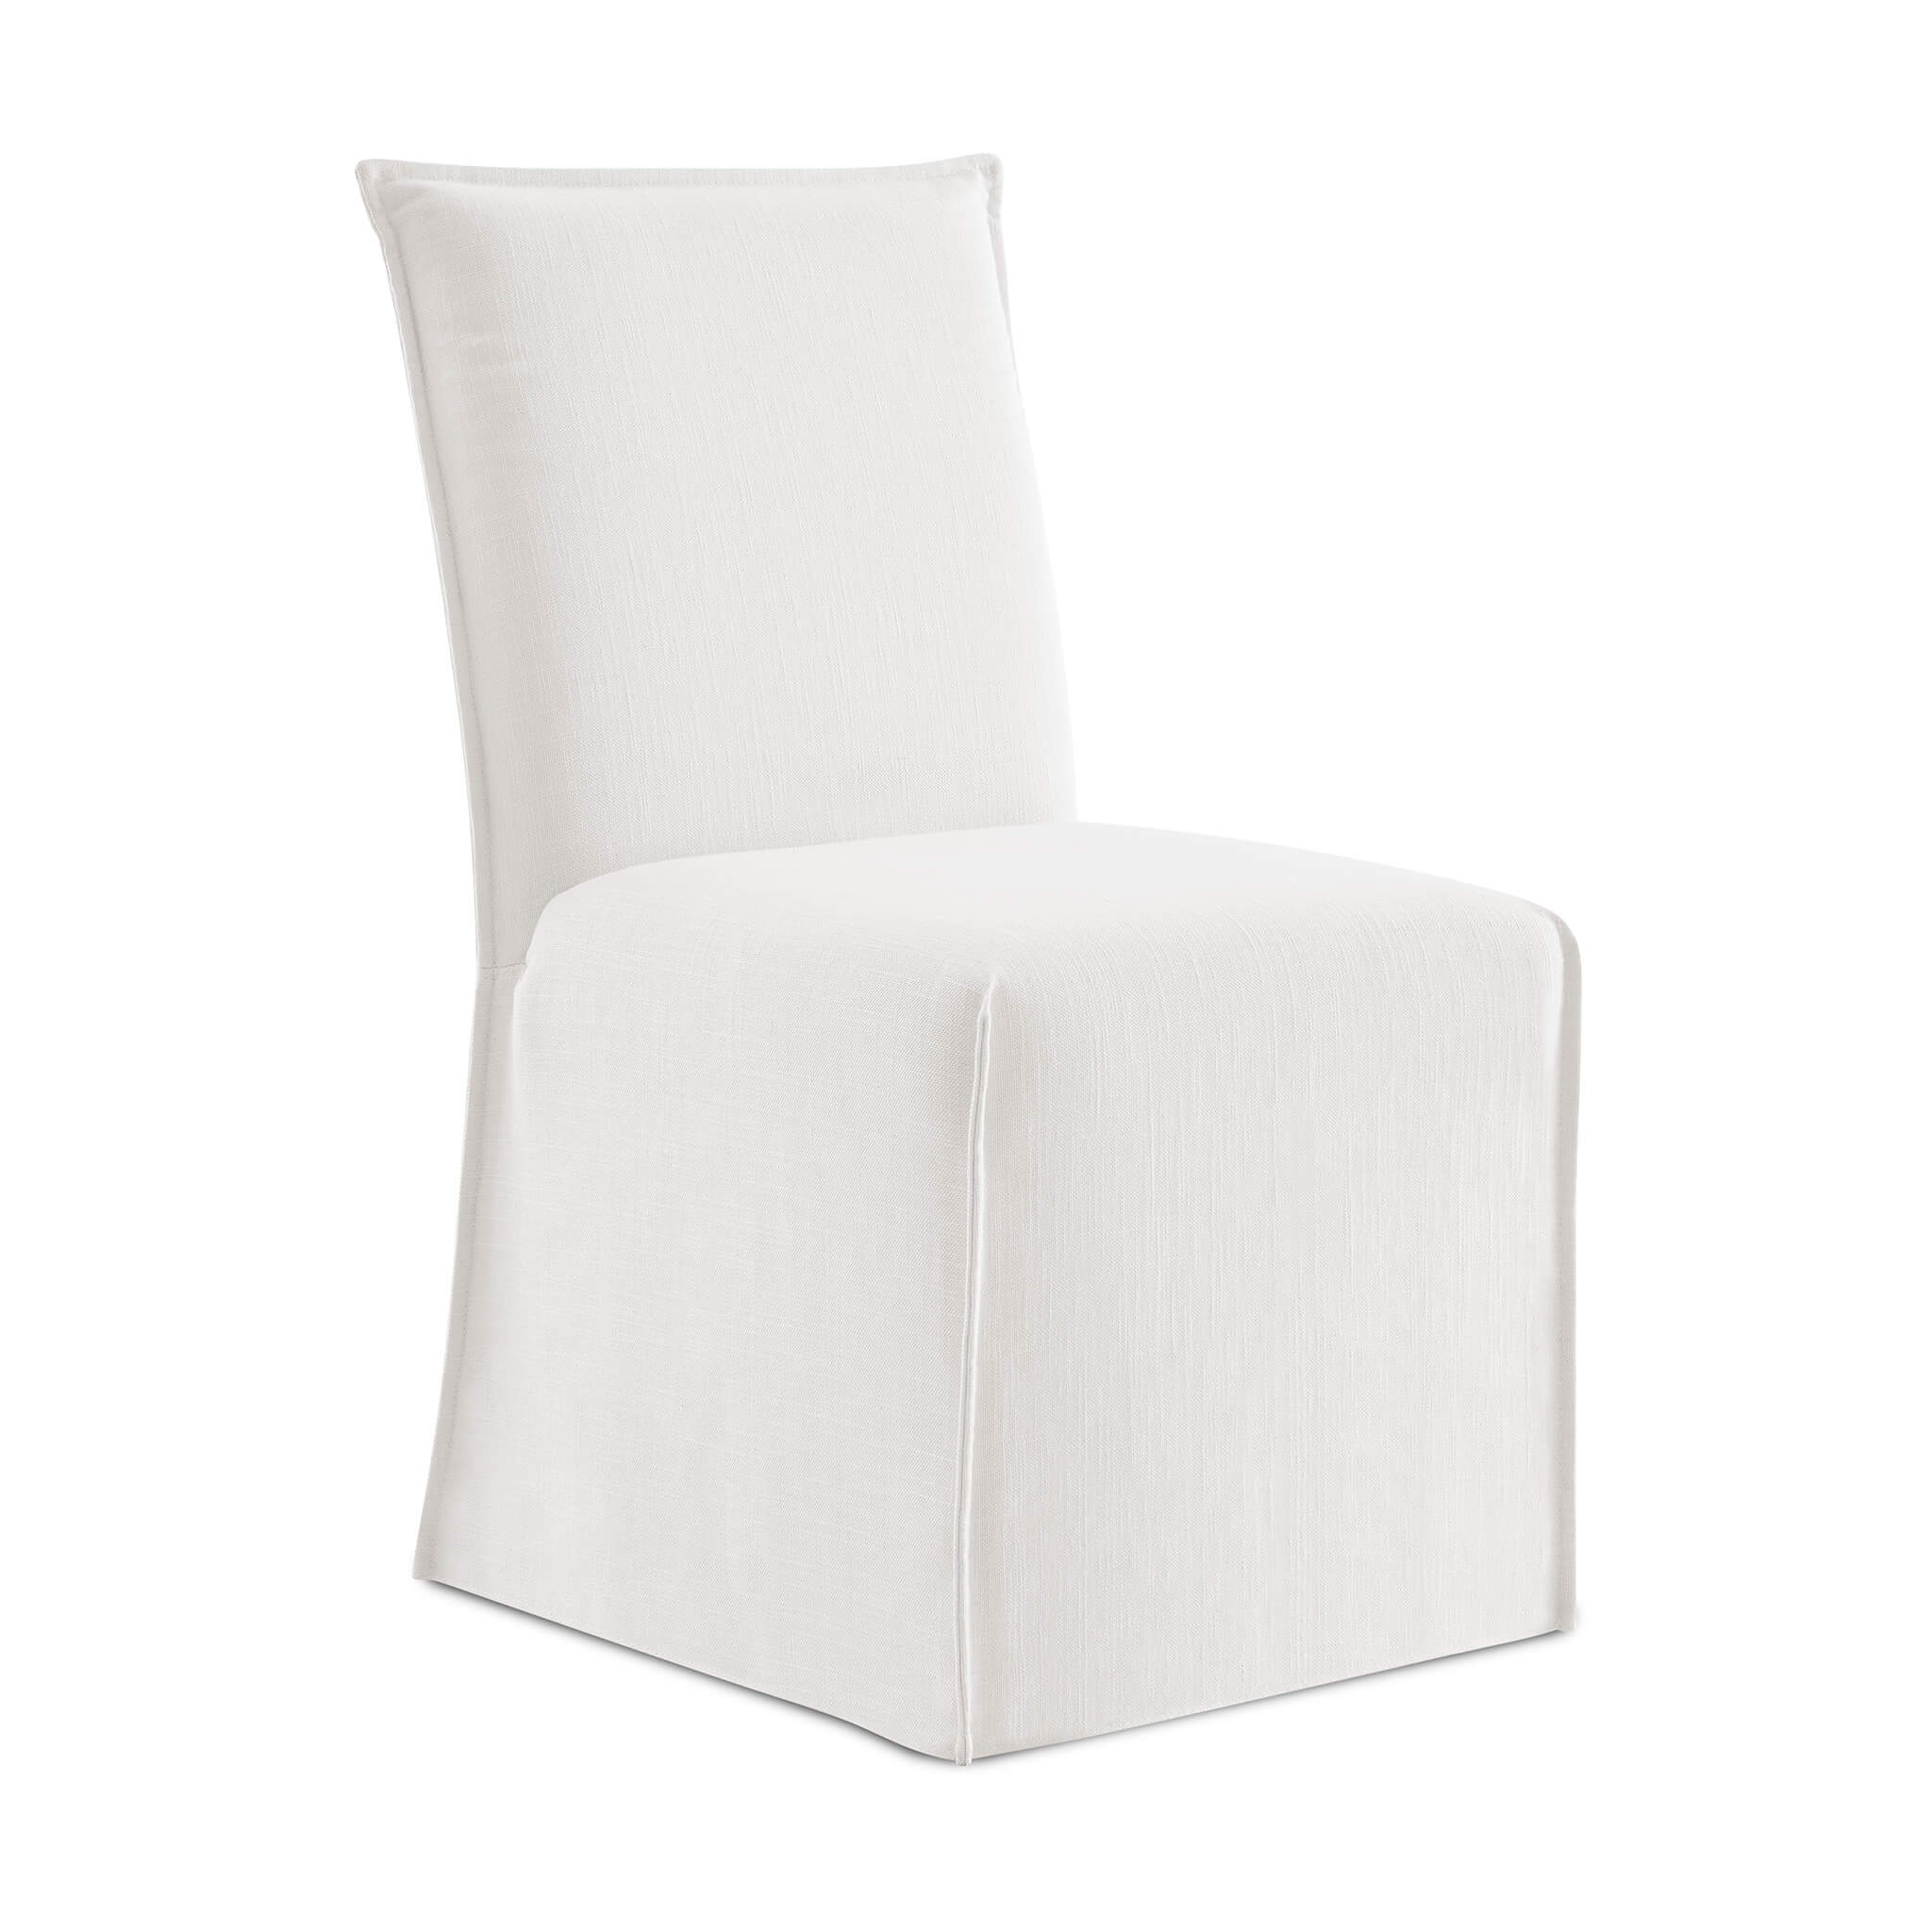 EM Wabisabi Casual Slipcovered Side Chair Textured Linen Weave-White